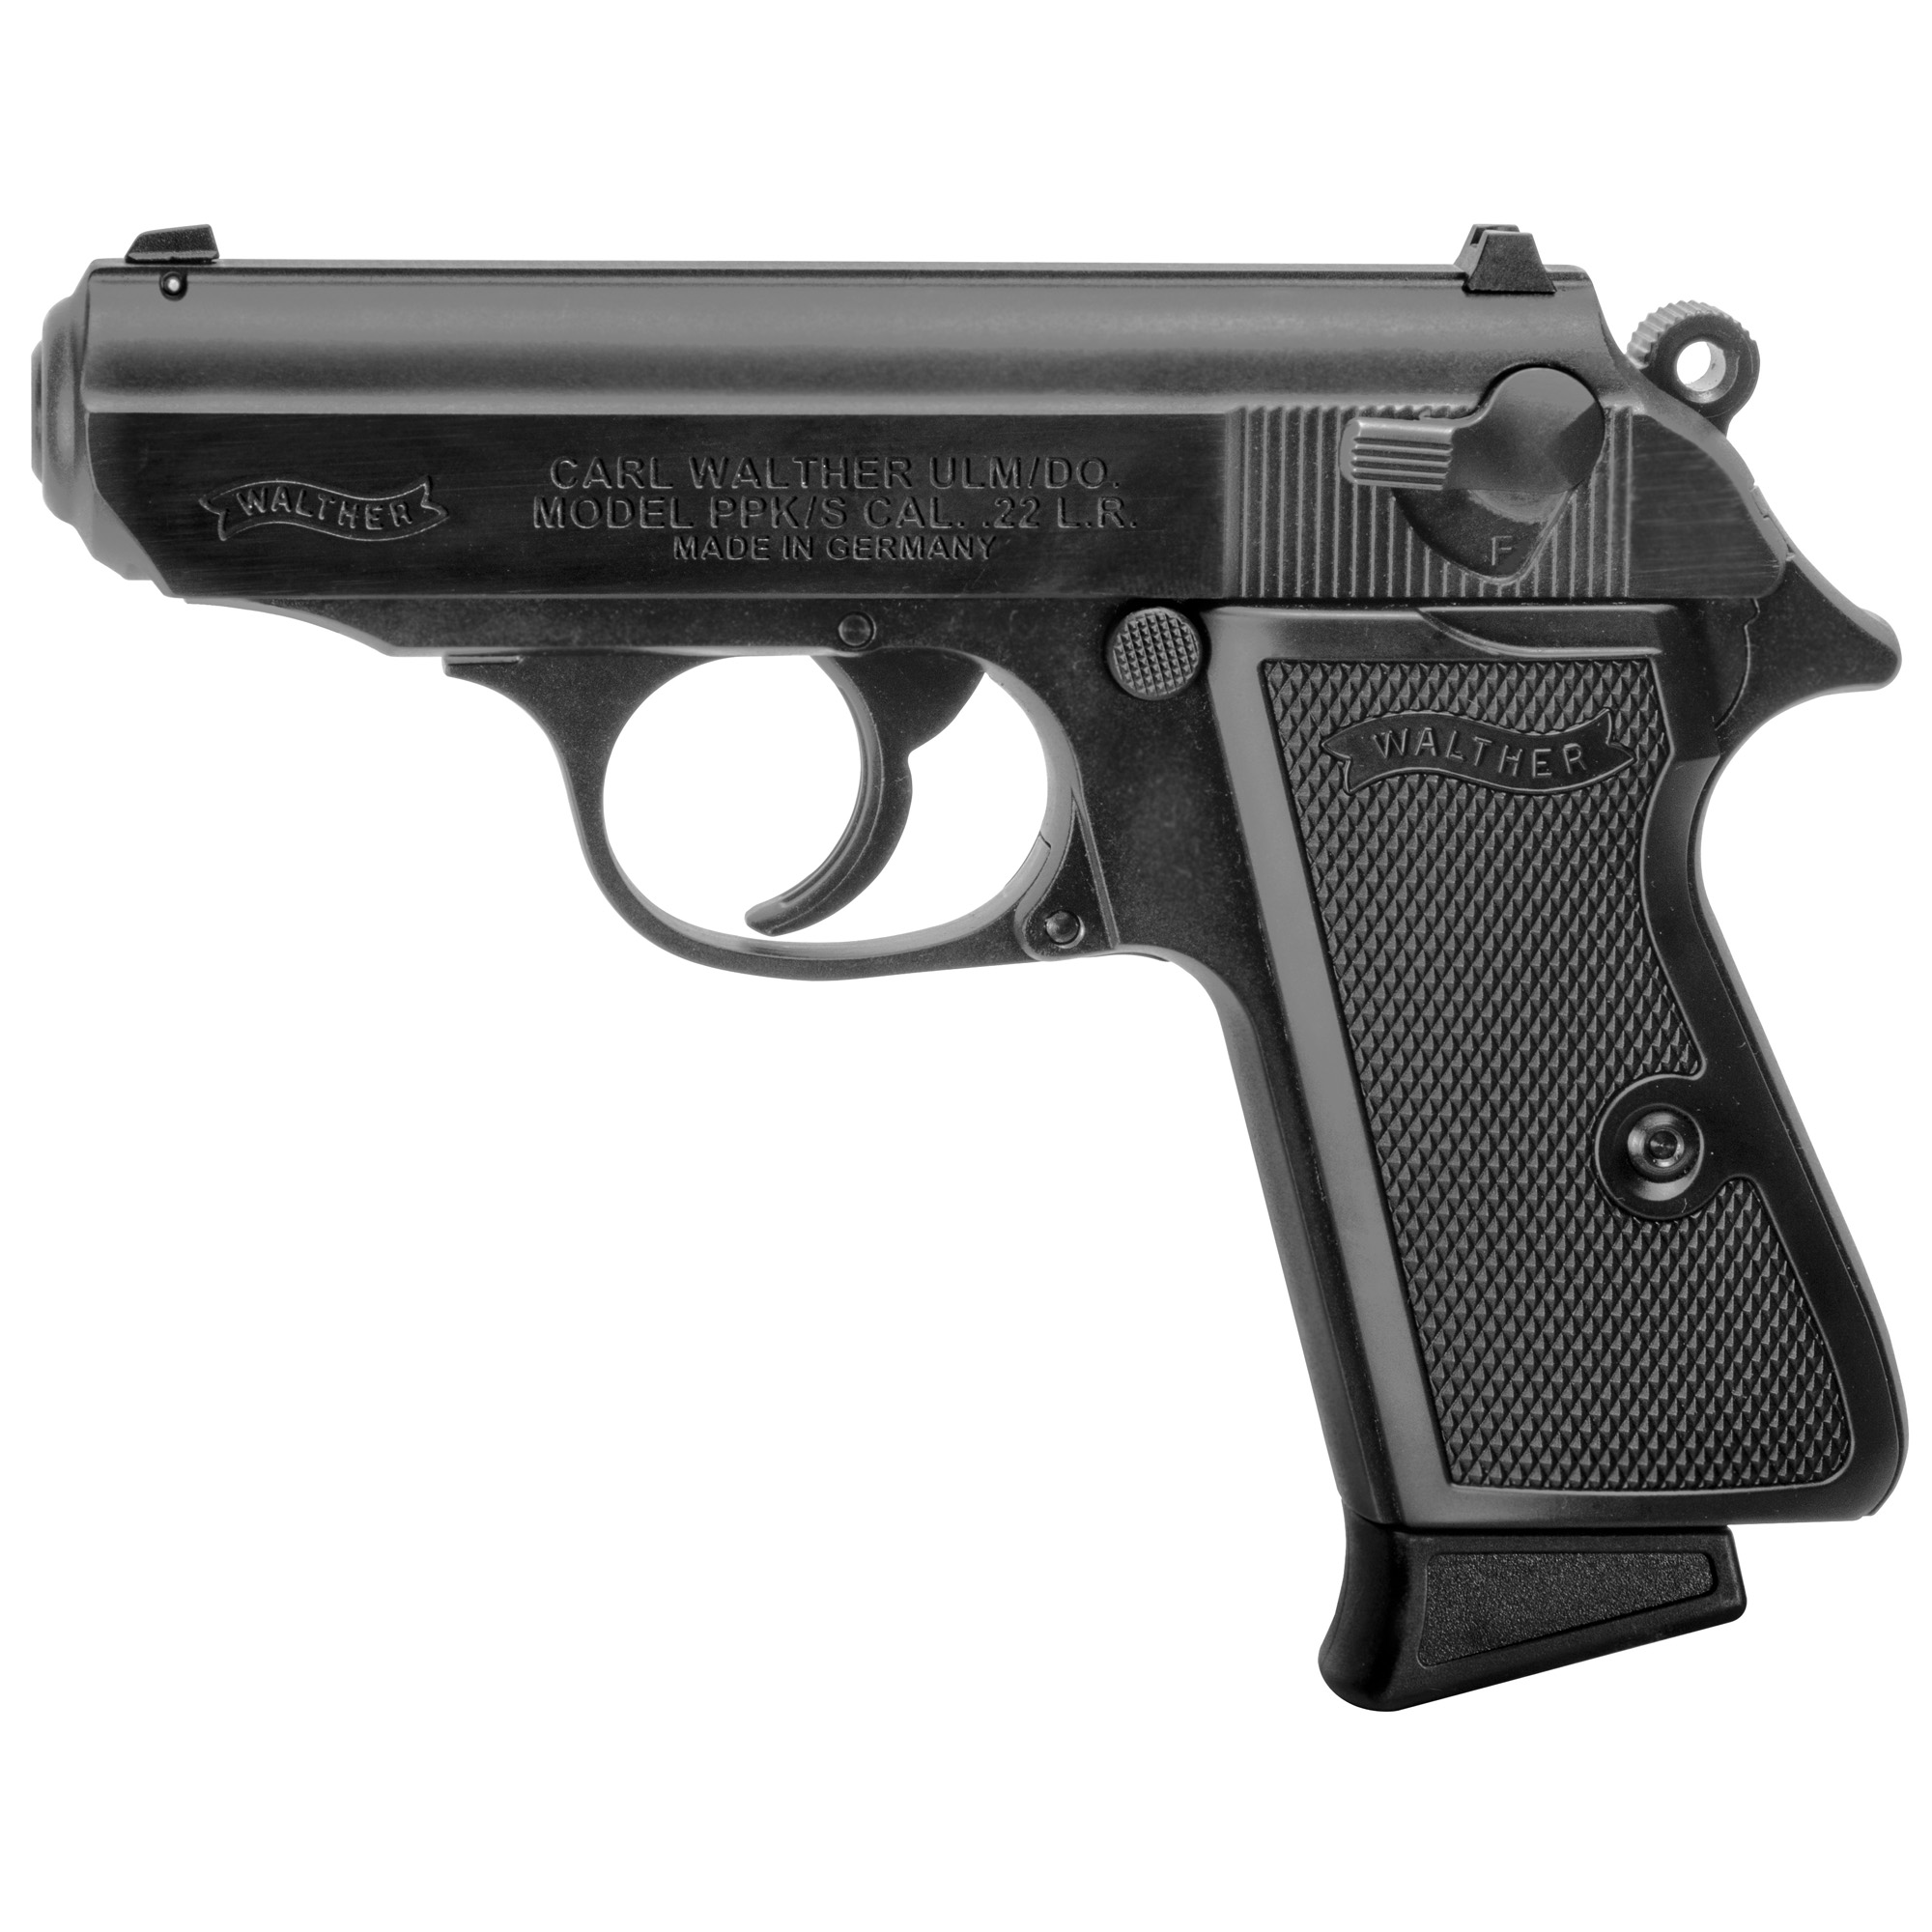 WALTHER PPK/S 22LR 3.3 10RD BLK FS